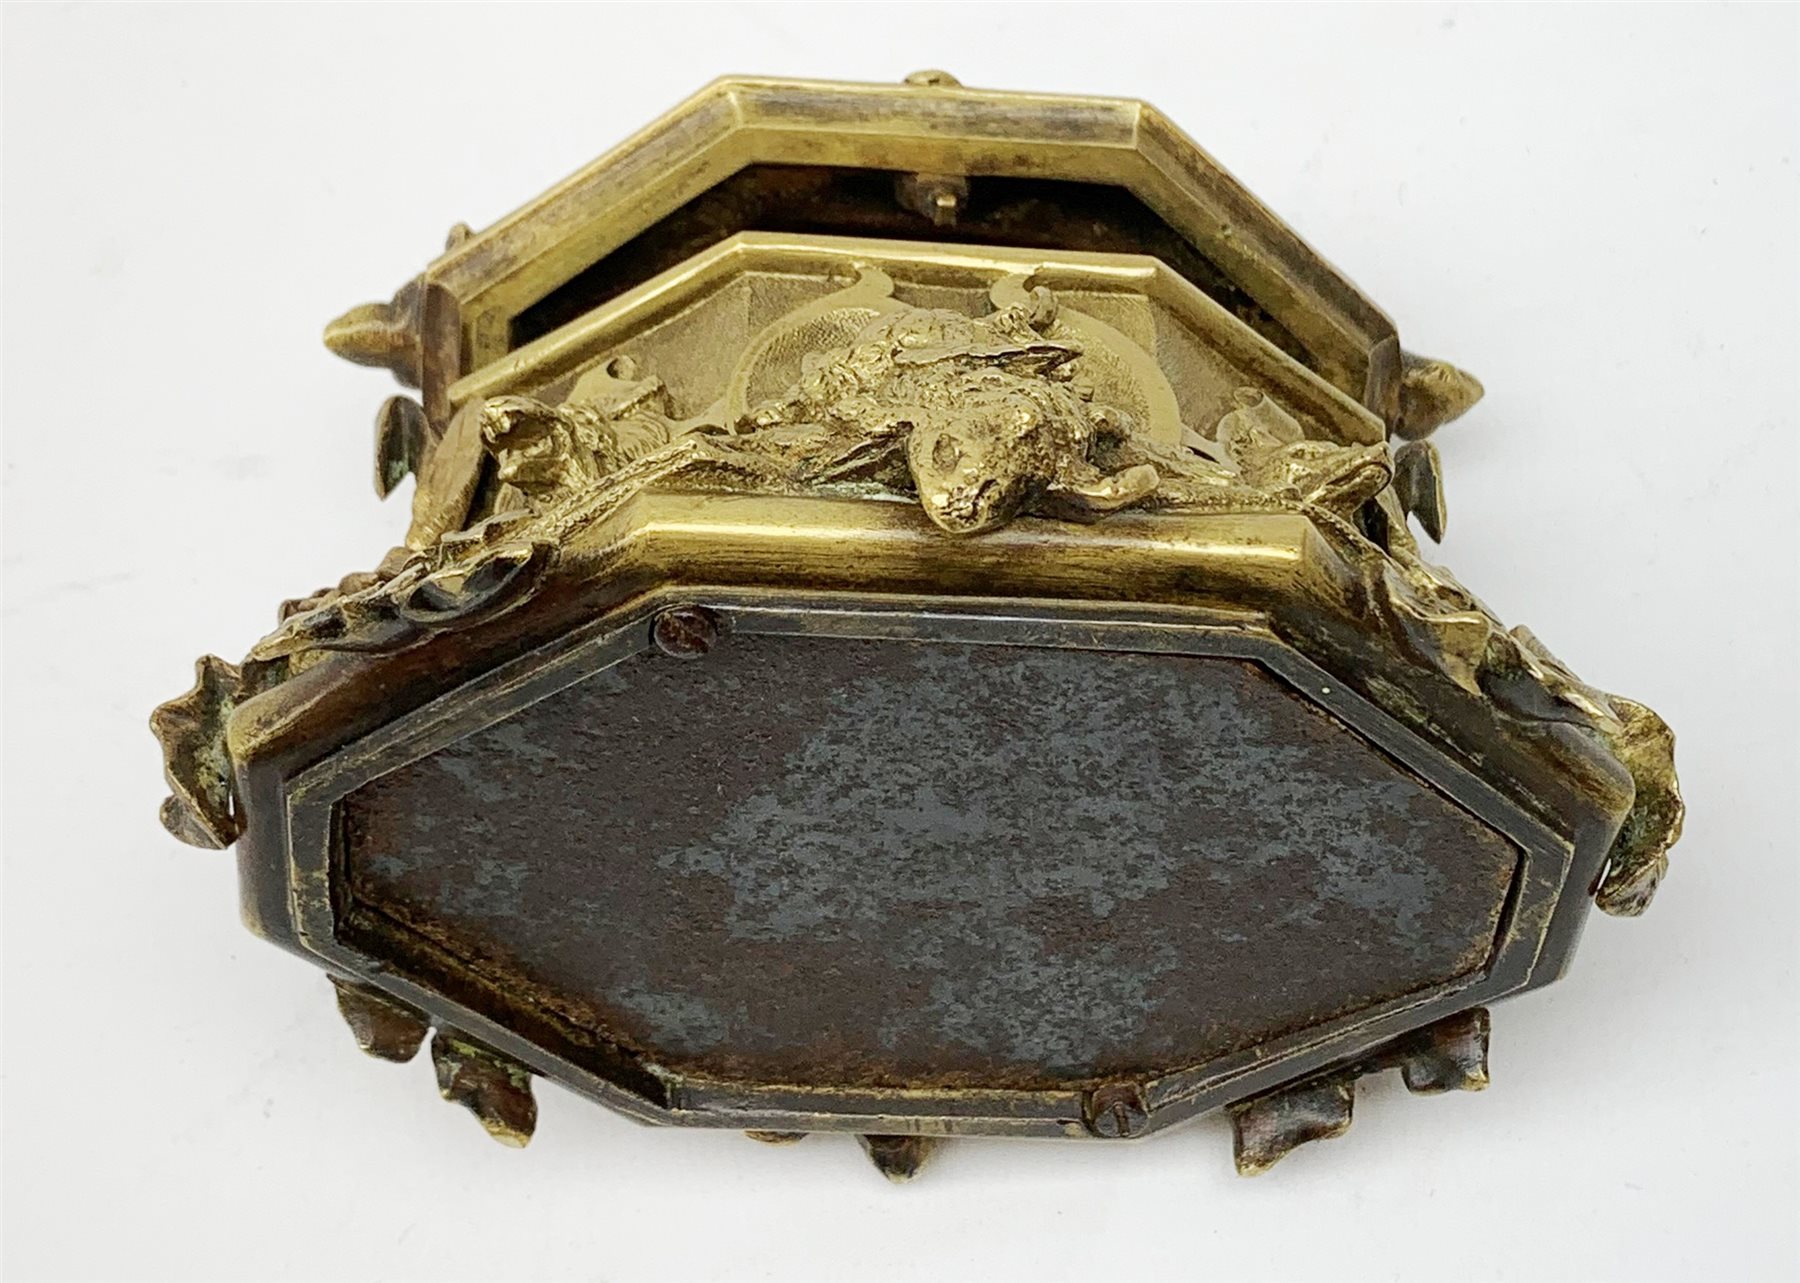 Late 19th century gilt bronze casket, of lozenge form with cast and applied detail in the form of ho - Image 5 of 9